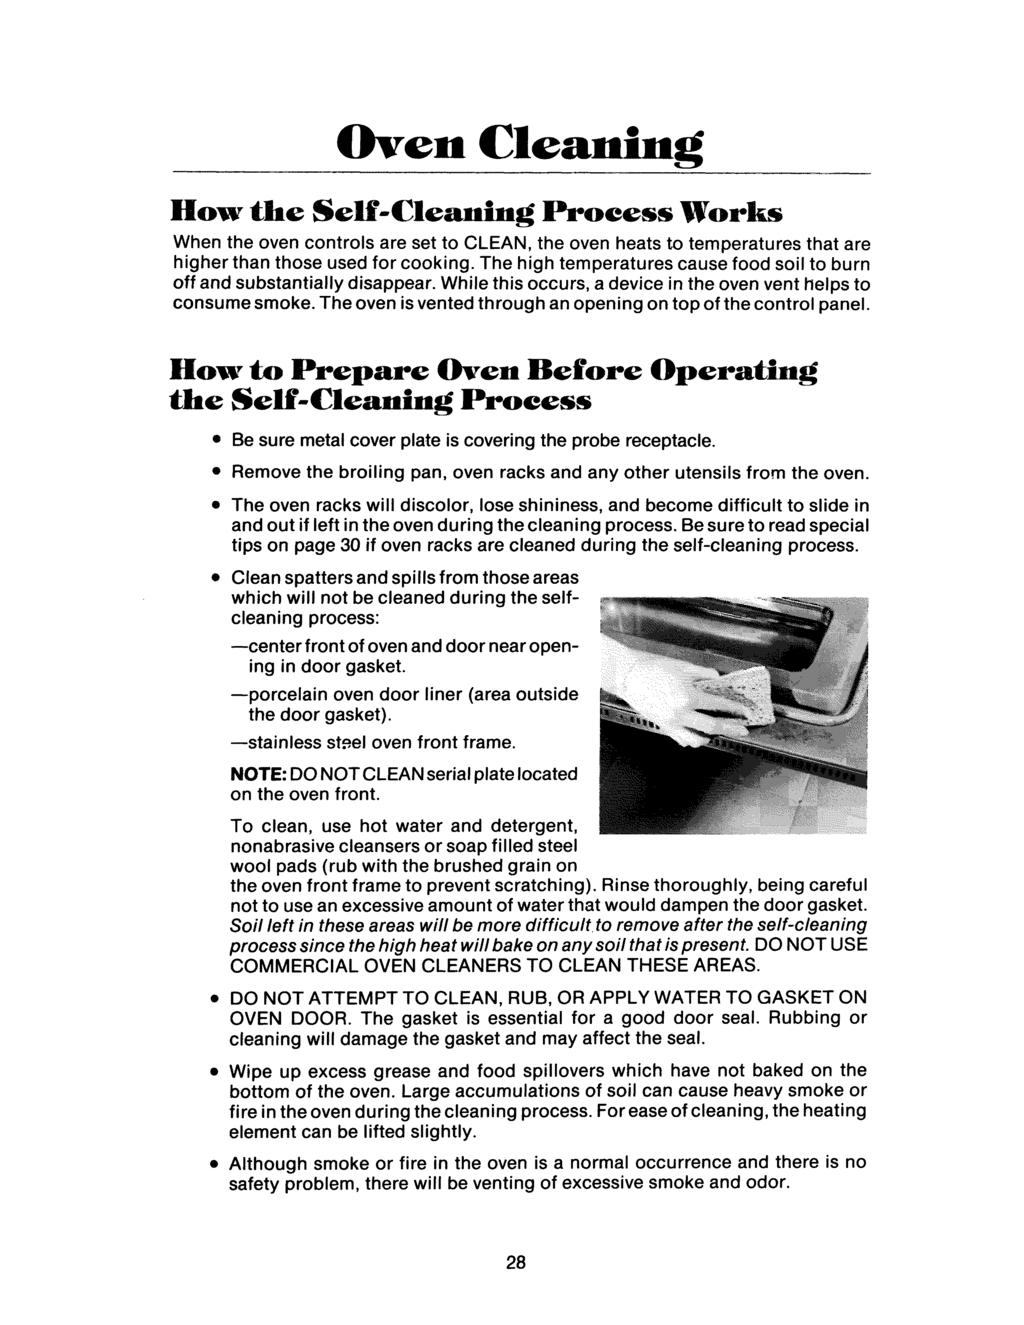 Oven Cleaning How the Self-Cleaning Process Works When the oven controls are set to CLEAN, the oven heats to temperatures that are higher than those used for cooking.